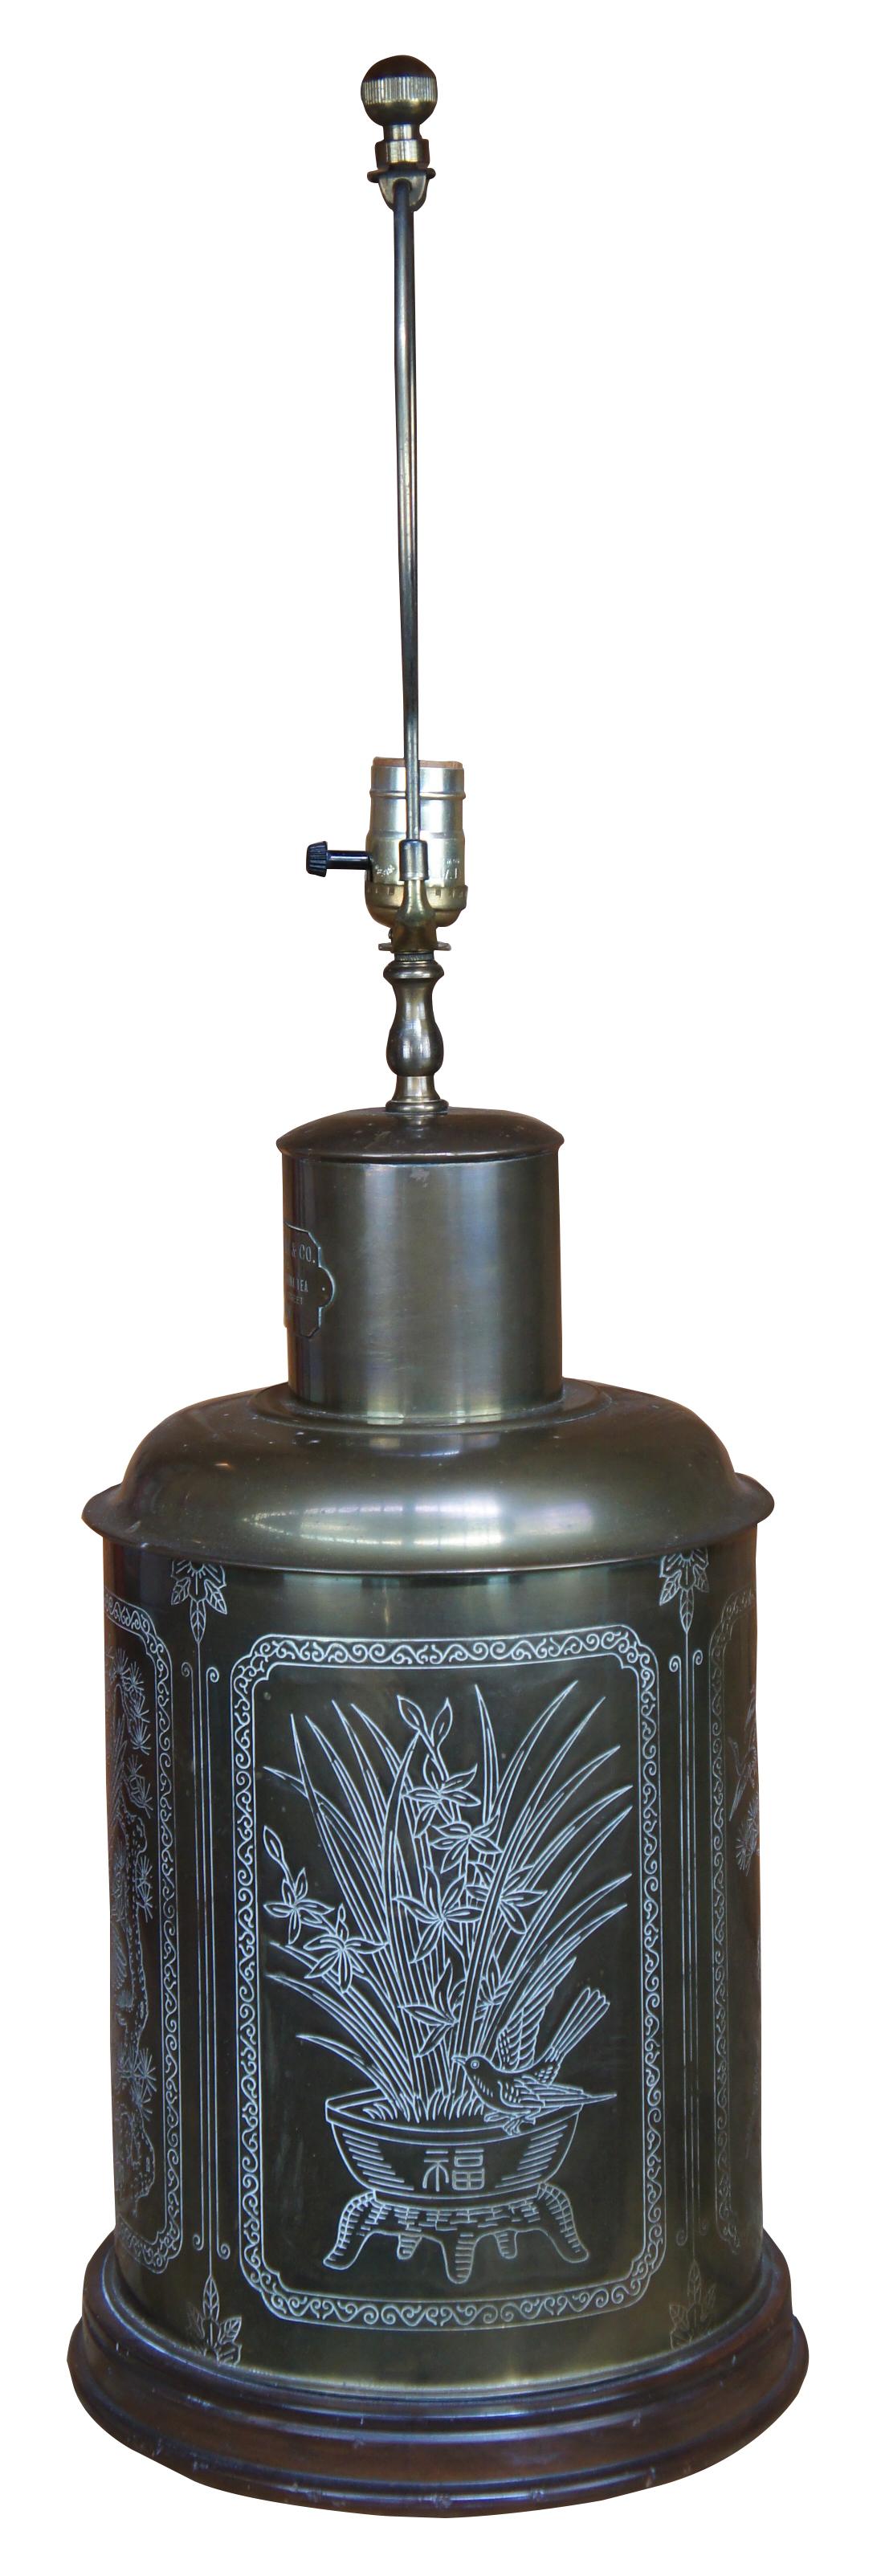 Rare, large brass tea canister stamped Shrewsbury and Co. Importers Great Tower Street London. This tea caddy was converted into a table lamp by Samuel Dinkelspiel of Chicago. Dinkelspiel was a Chicago lamp maker in the early 20th century who